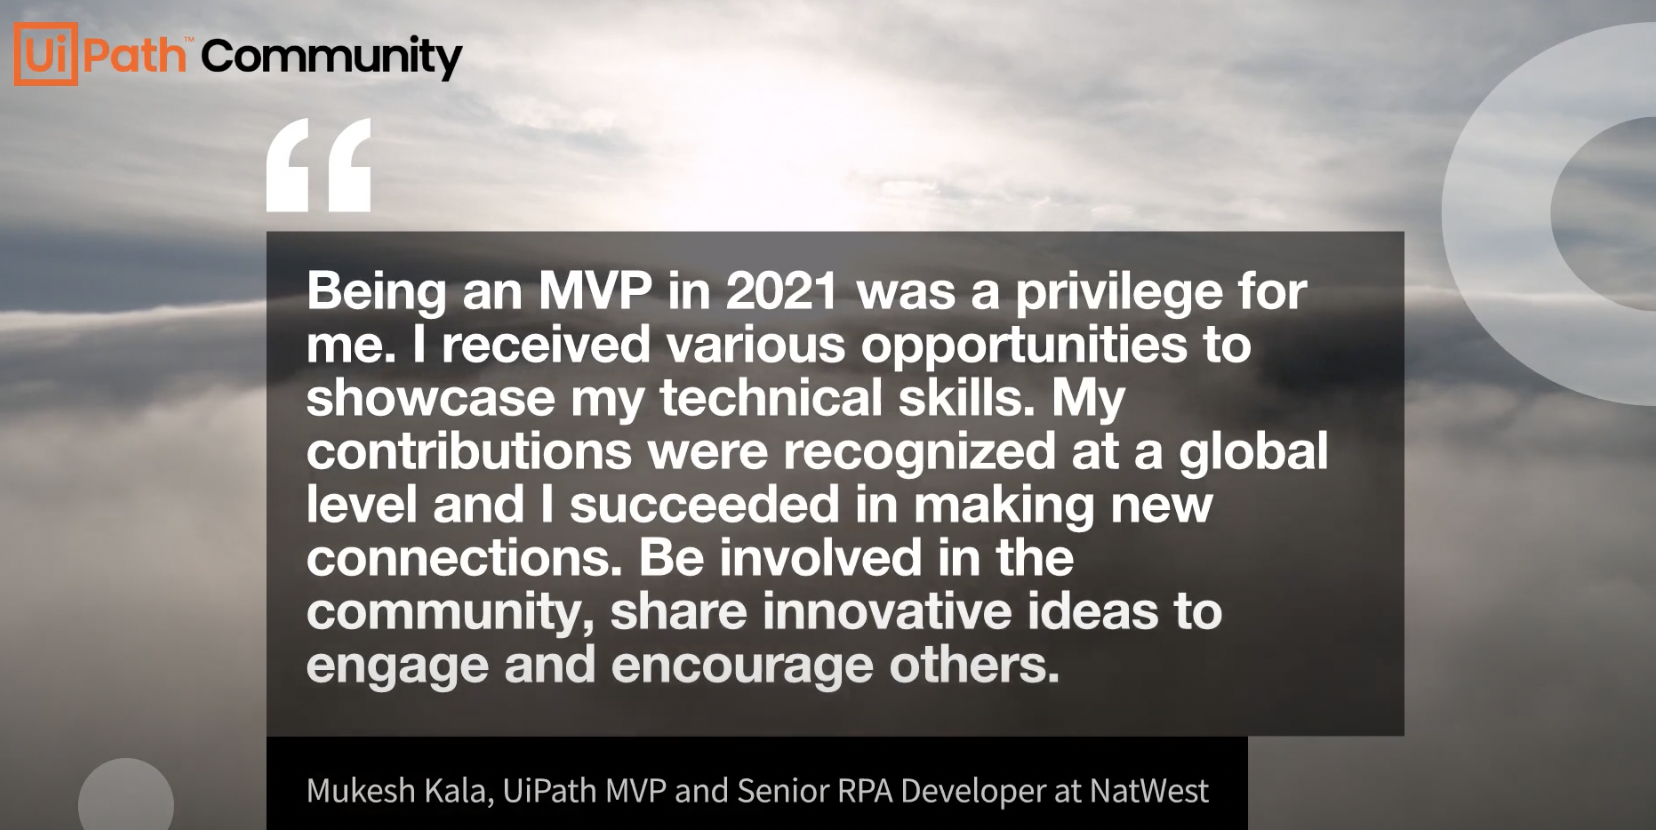 MVP Mukesh Kala “My contributions were recognized at a global level.”